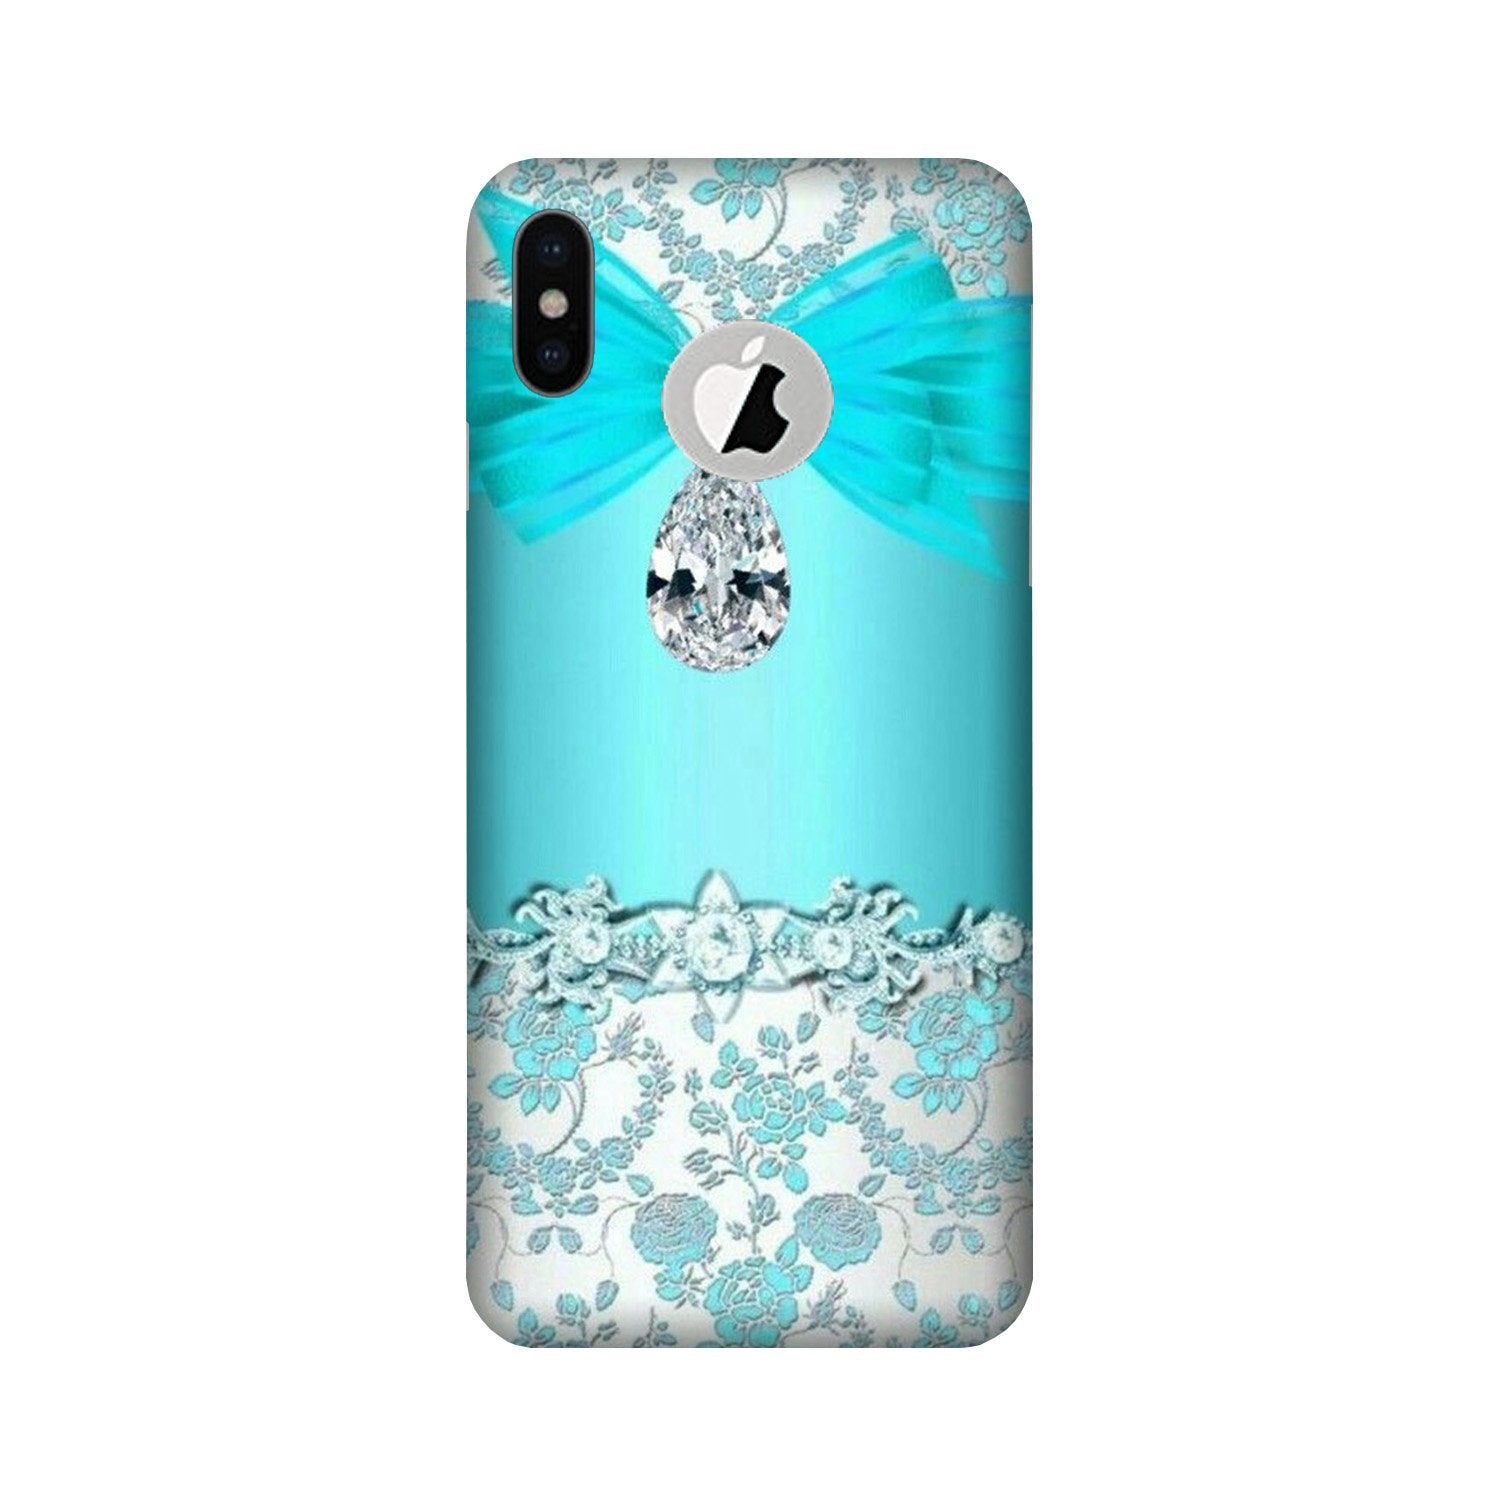 Shinny Blue Background Case for iPhone Xs logo cut 